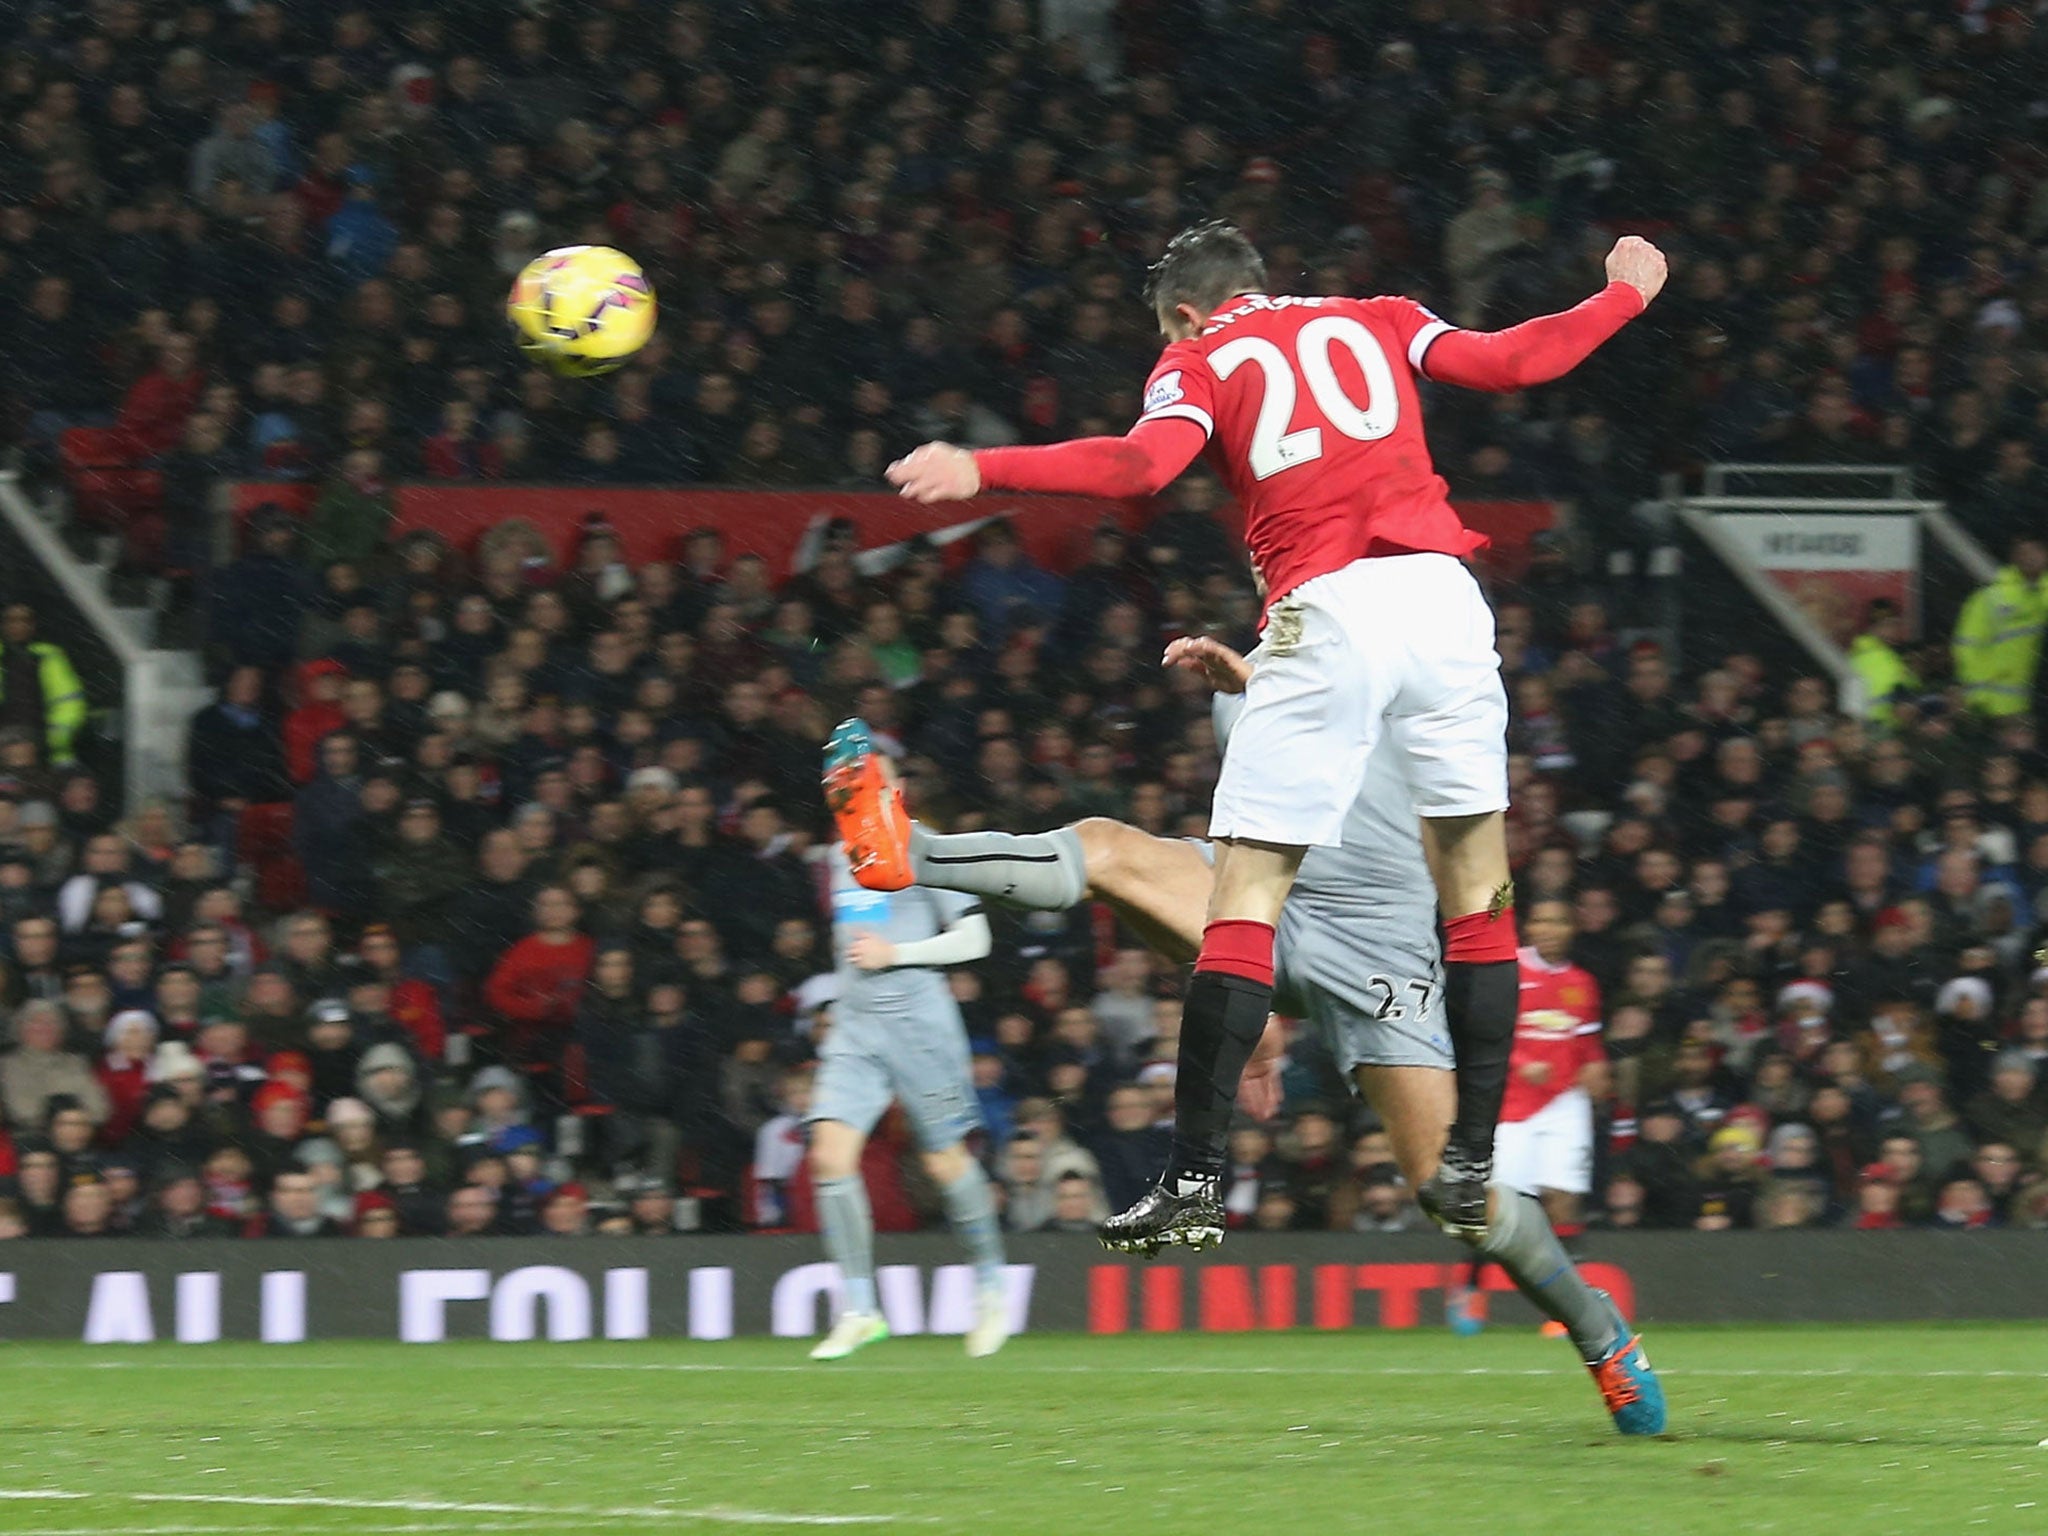 Van Persie scores the third for Manchester United with a perfectly-guided header